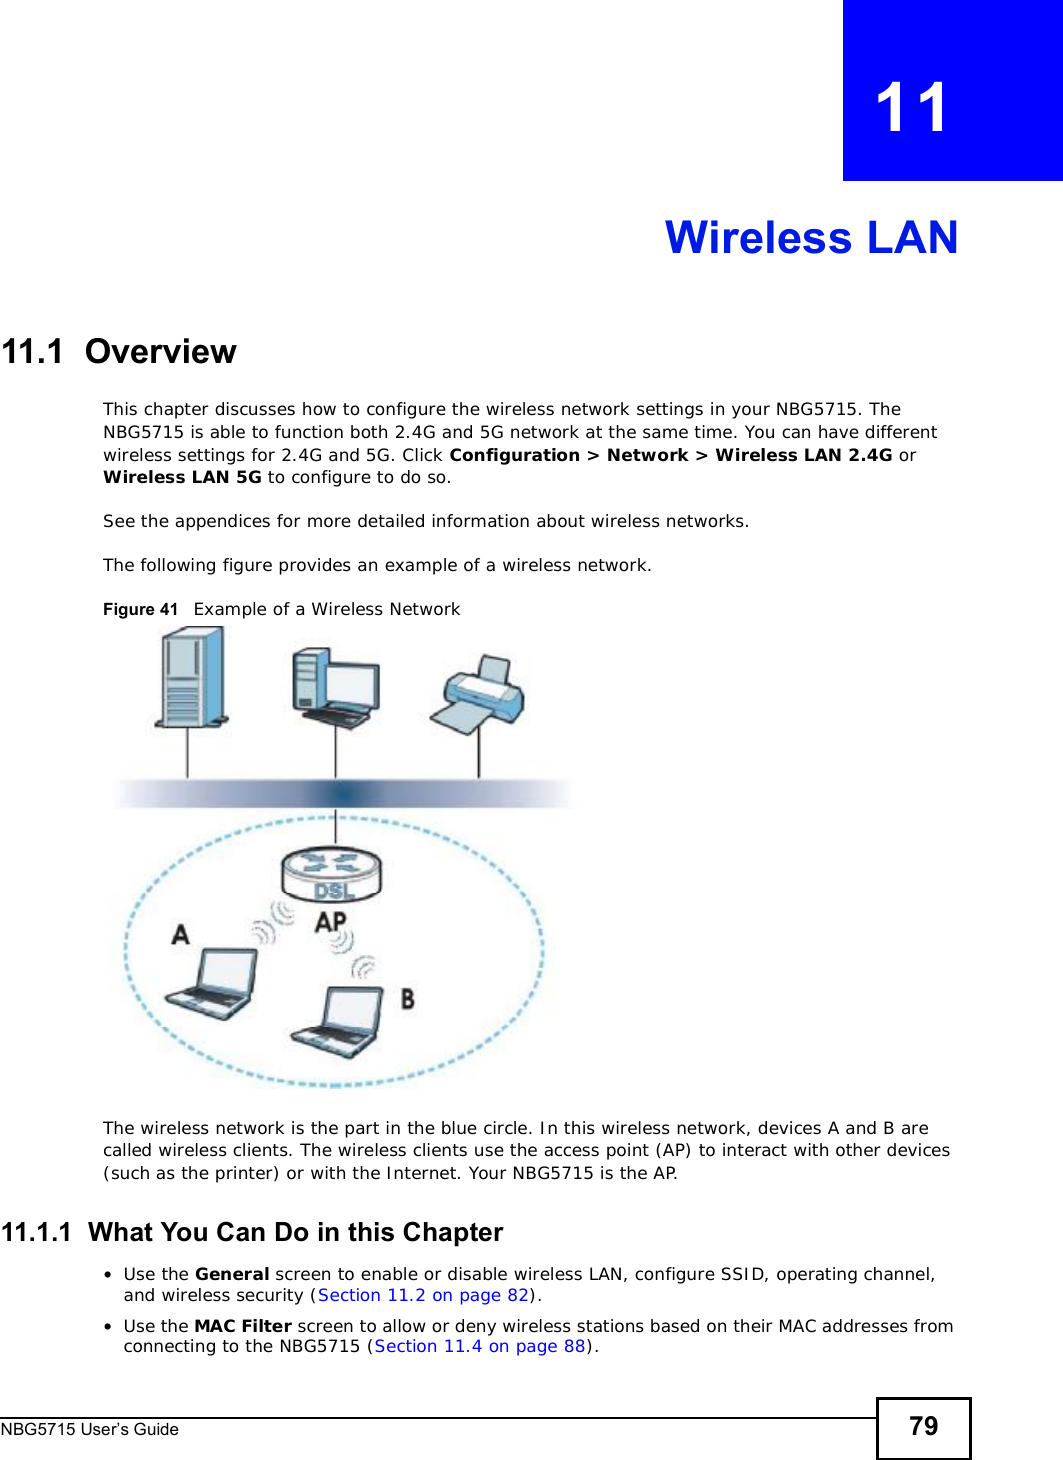 NBG5715 User’s Guide 79CHAPTER   11Wireless LAN11.1  OverviewThis chapter discusses how to configure the wireless network settings in your NBG5715. The NBG5715 is able to function both 2.4G and 5G network at the same time. You can have different wireless settings for 2.4G and 5G. Click Configuration &gt; Network &gt; Wireless LAN 2.4G or Wireless LAN 5G to configure to do so. See the appendices for more detailed information about wireless networks. The following figure provides an example of a wireless network.Figure 41   Example of a Wireless NetworkThe wireless network is the part in the blue circle. In this wireless network, devices A and B are called wireless clients. The wireless clients use the access point (AP) to interact with other devices (such as the printer) or with the Internet. Your NBG5715 is the AP.11.1.1  What You Can Do in this Chapter•Use the General screen to enable or disable wireless LAN, configure SSID, operating channel, and wireless security (Section 11.2 on page 82).•Use the MAC Filter screen to allow or deny wireless stations based on their MAC addresses from connecting to the NBG5715 (Section 11.4 on page 88).